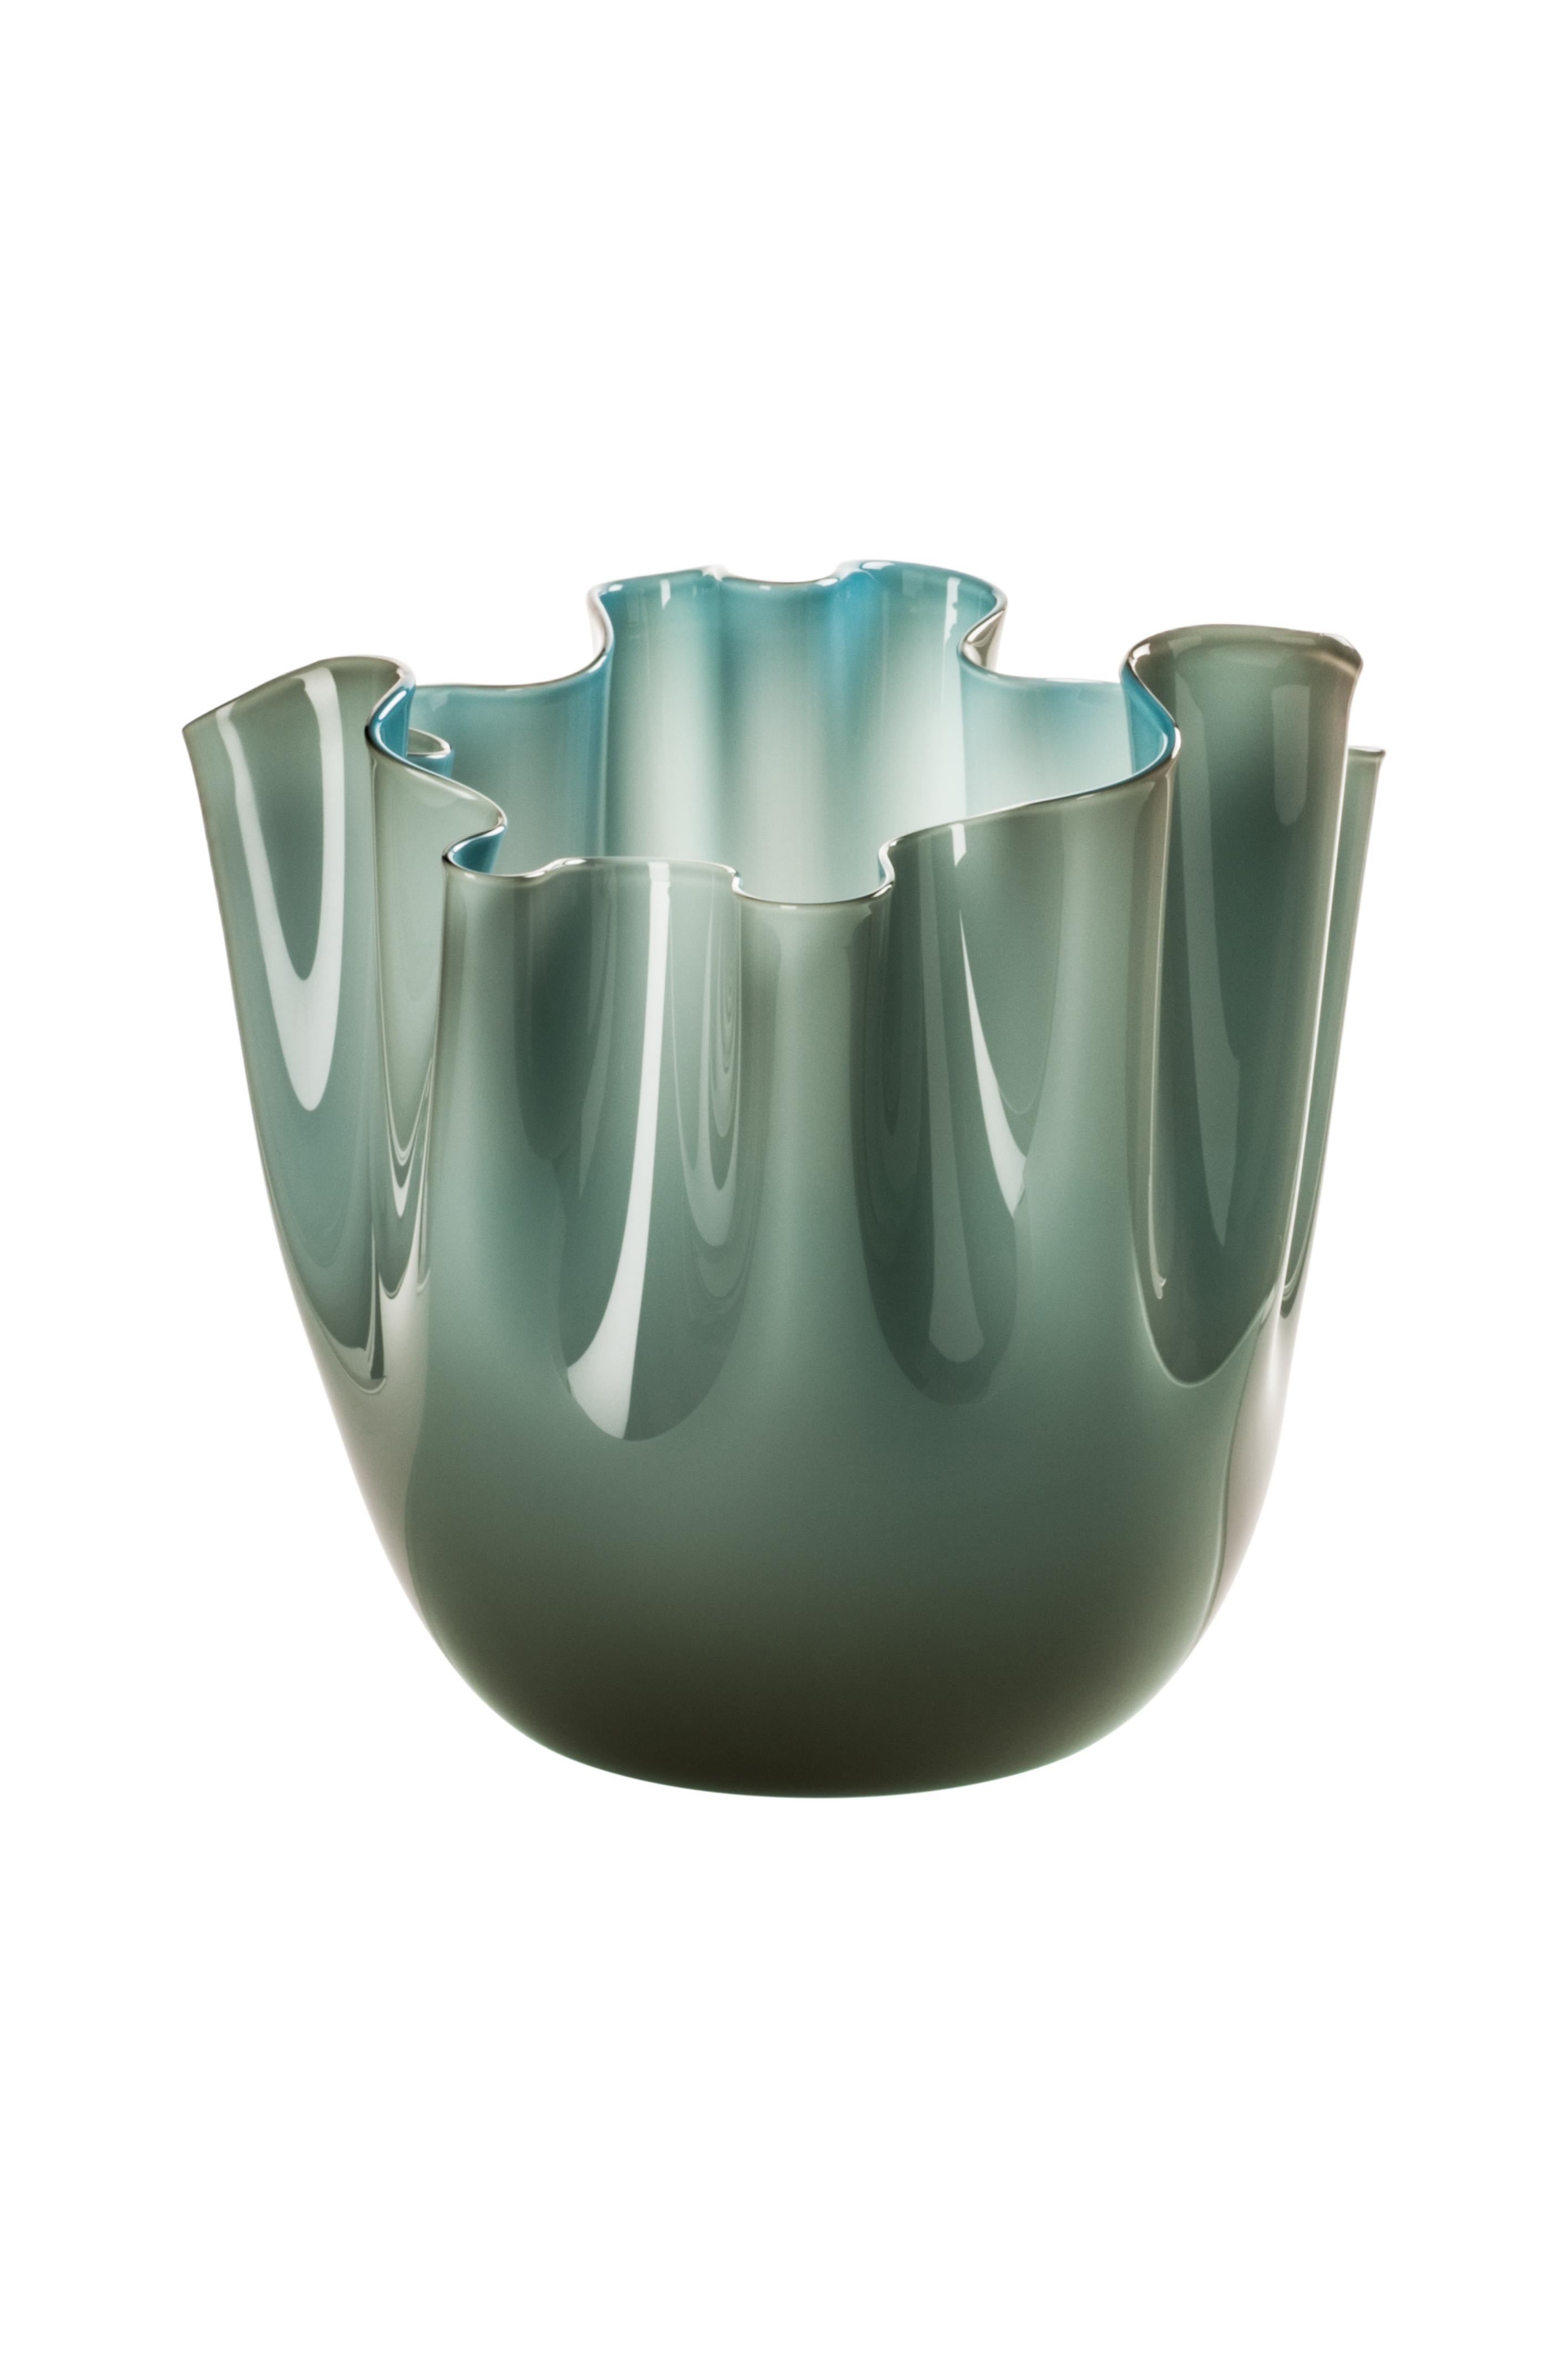 Venini glass vase with pinched rim in grey and aquamarine designed by Fulvio Bianconi and Paolo Venini in 1948. Perfect for indoor home decor as container, vide-poche or statement piece for any room. Also available in other colors on